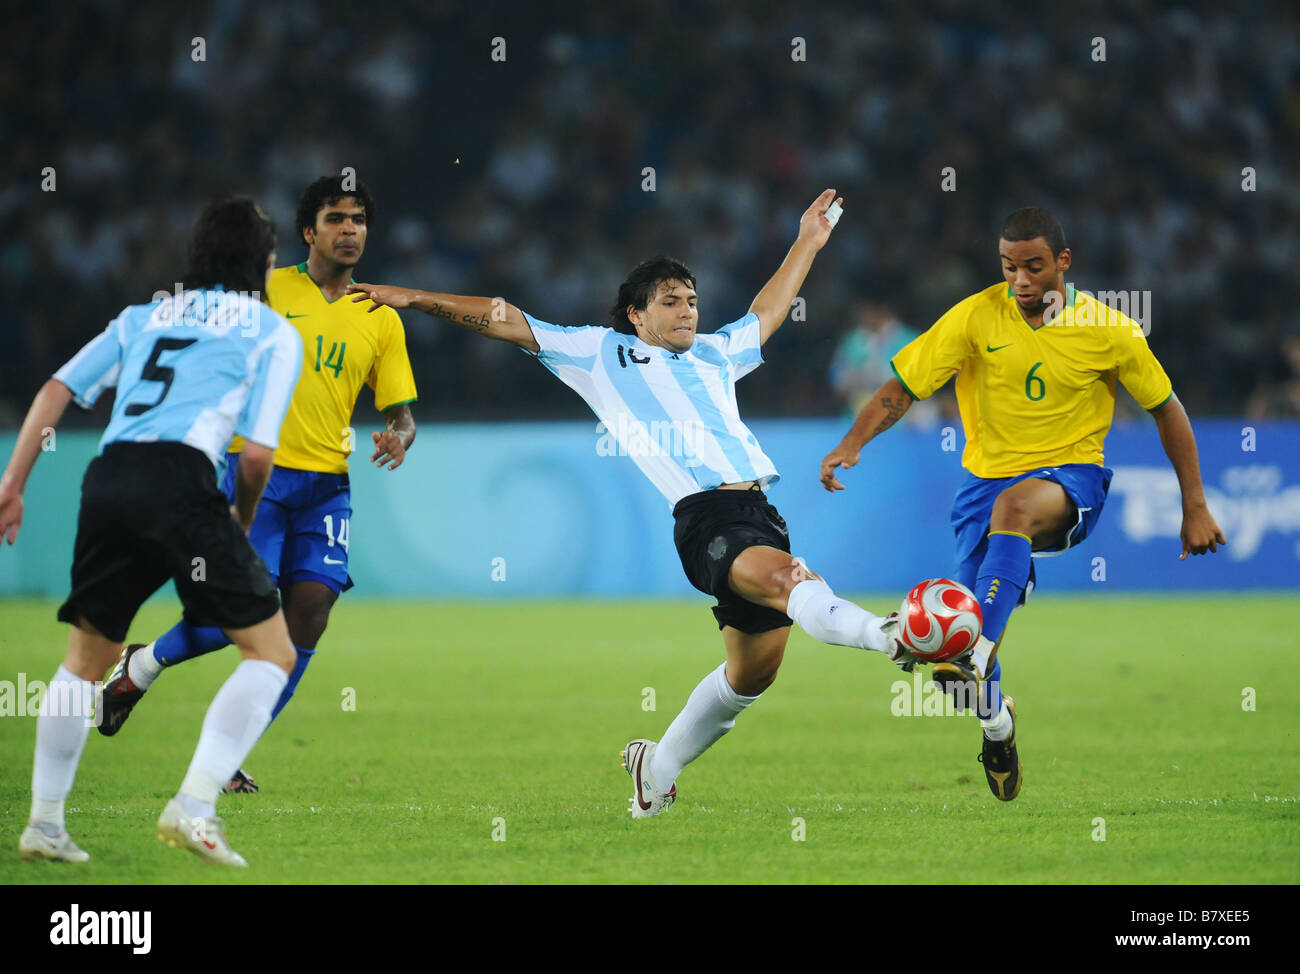 Sergio Aguero ARG AUGUST 19 2008 Football Beijing 2008 Olympic Games Mens Football semi final match between Argentina and Brazil at Workers Stadium in Beijing China Photo by Atsushi Tomura AFLO SPORT 1035 Stock Photo